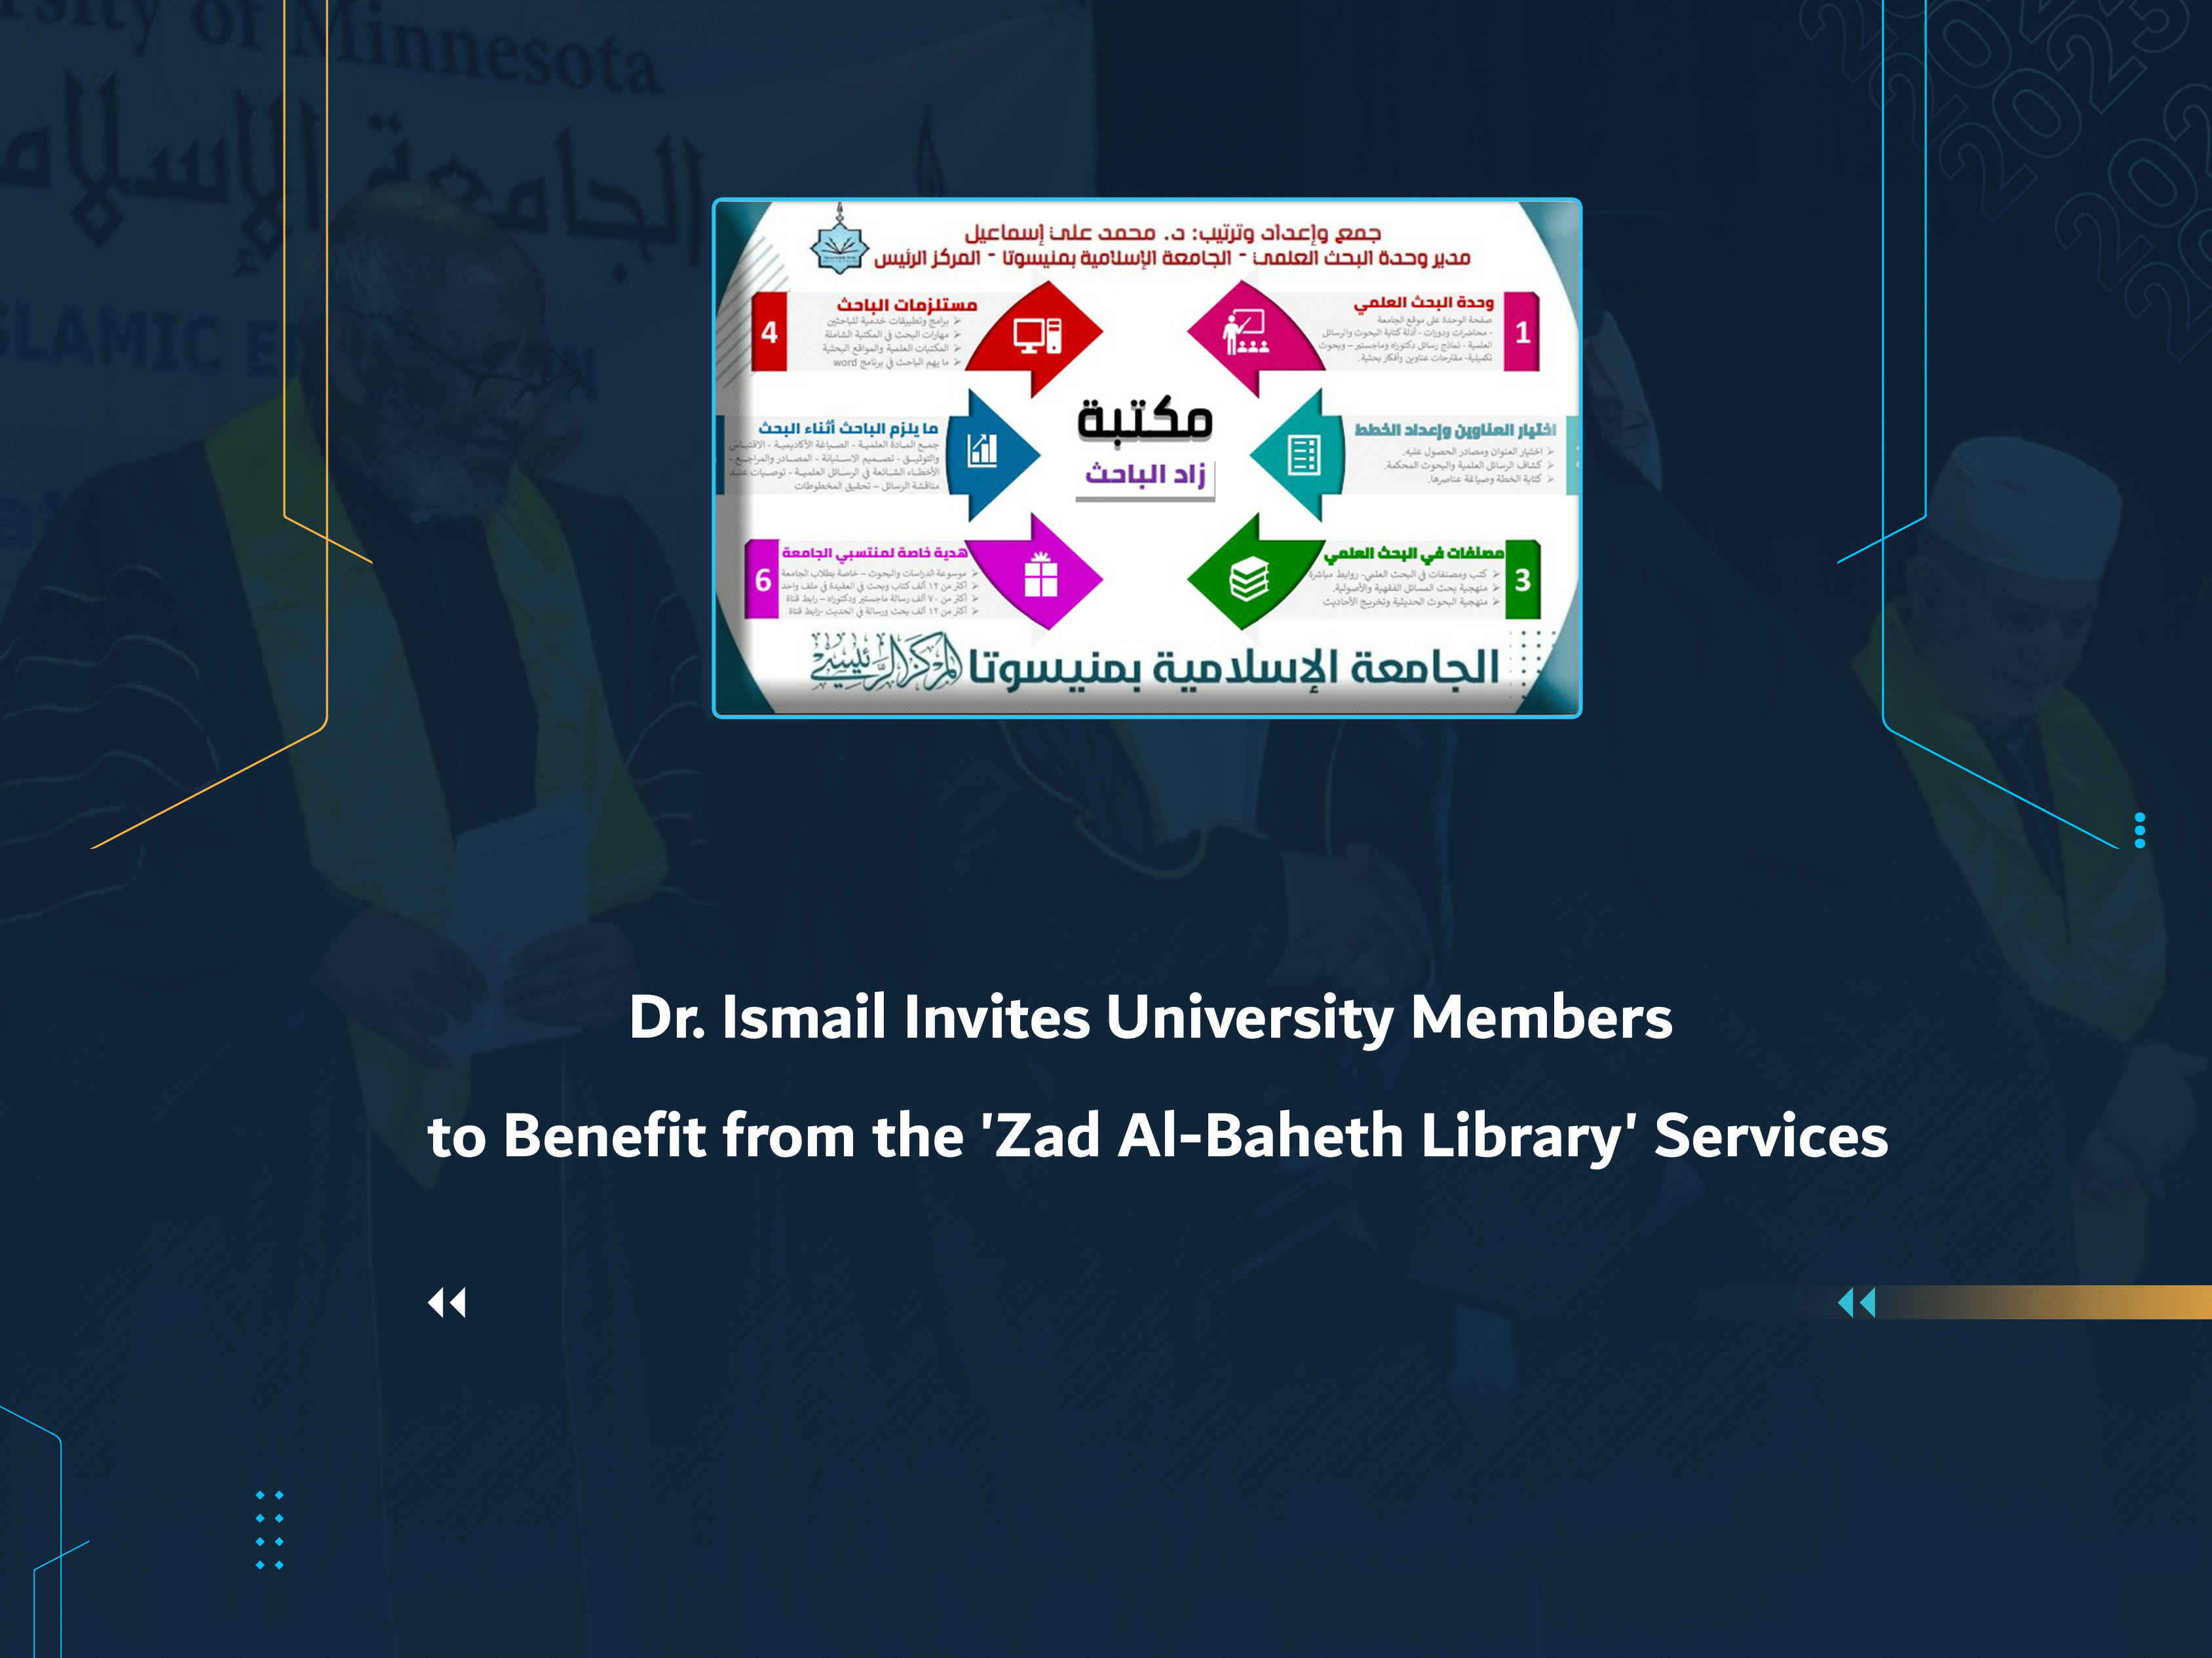 Dr. Ismail Invites University Members to Benefit from the 'Zad Al-Baheth Library' Services